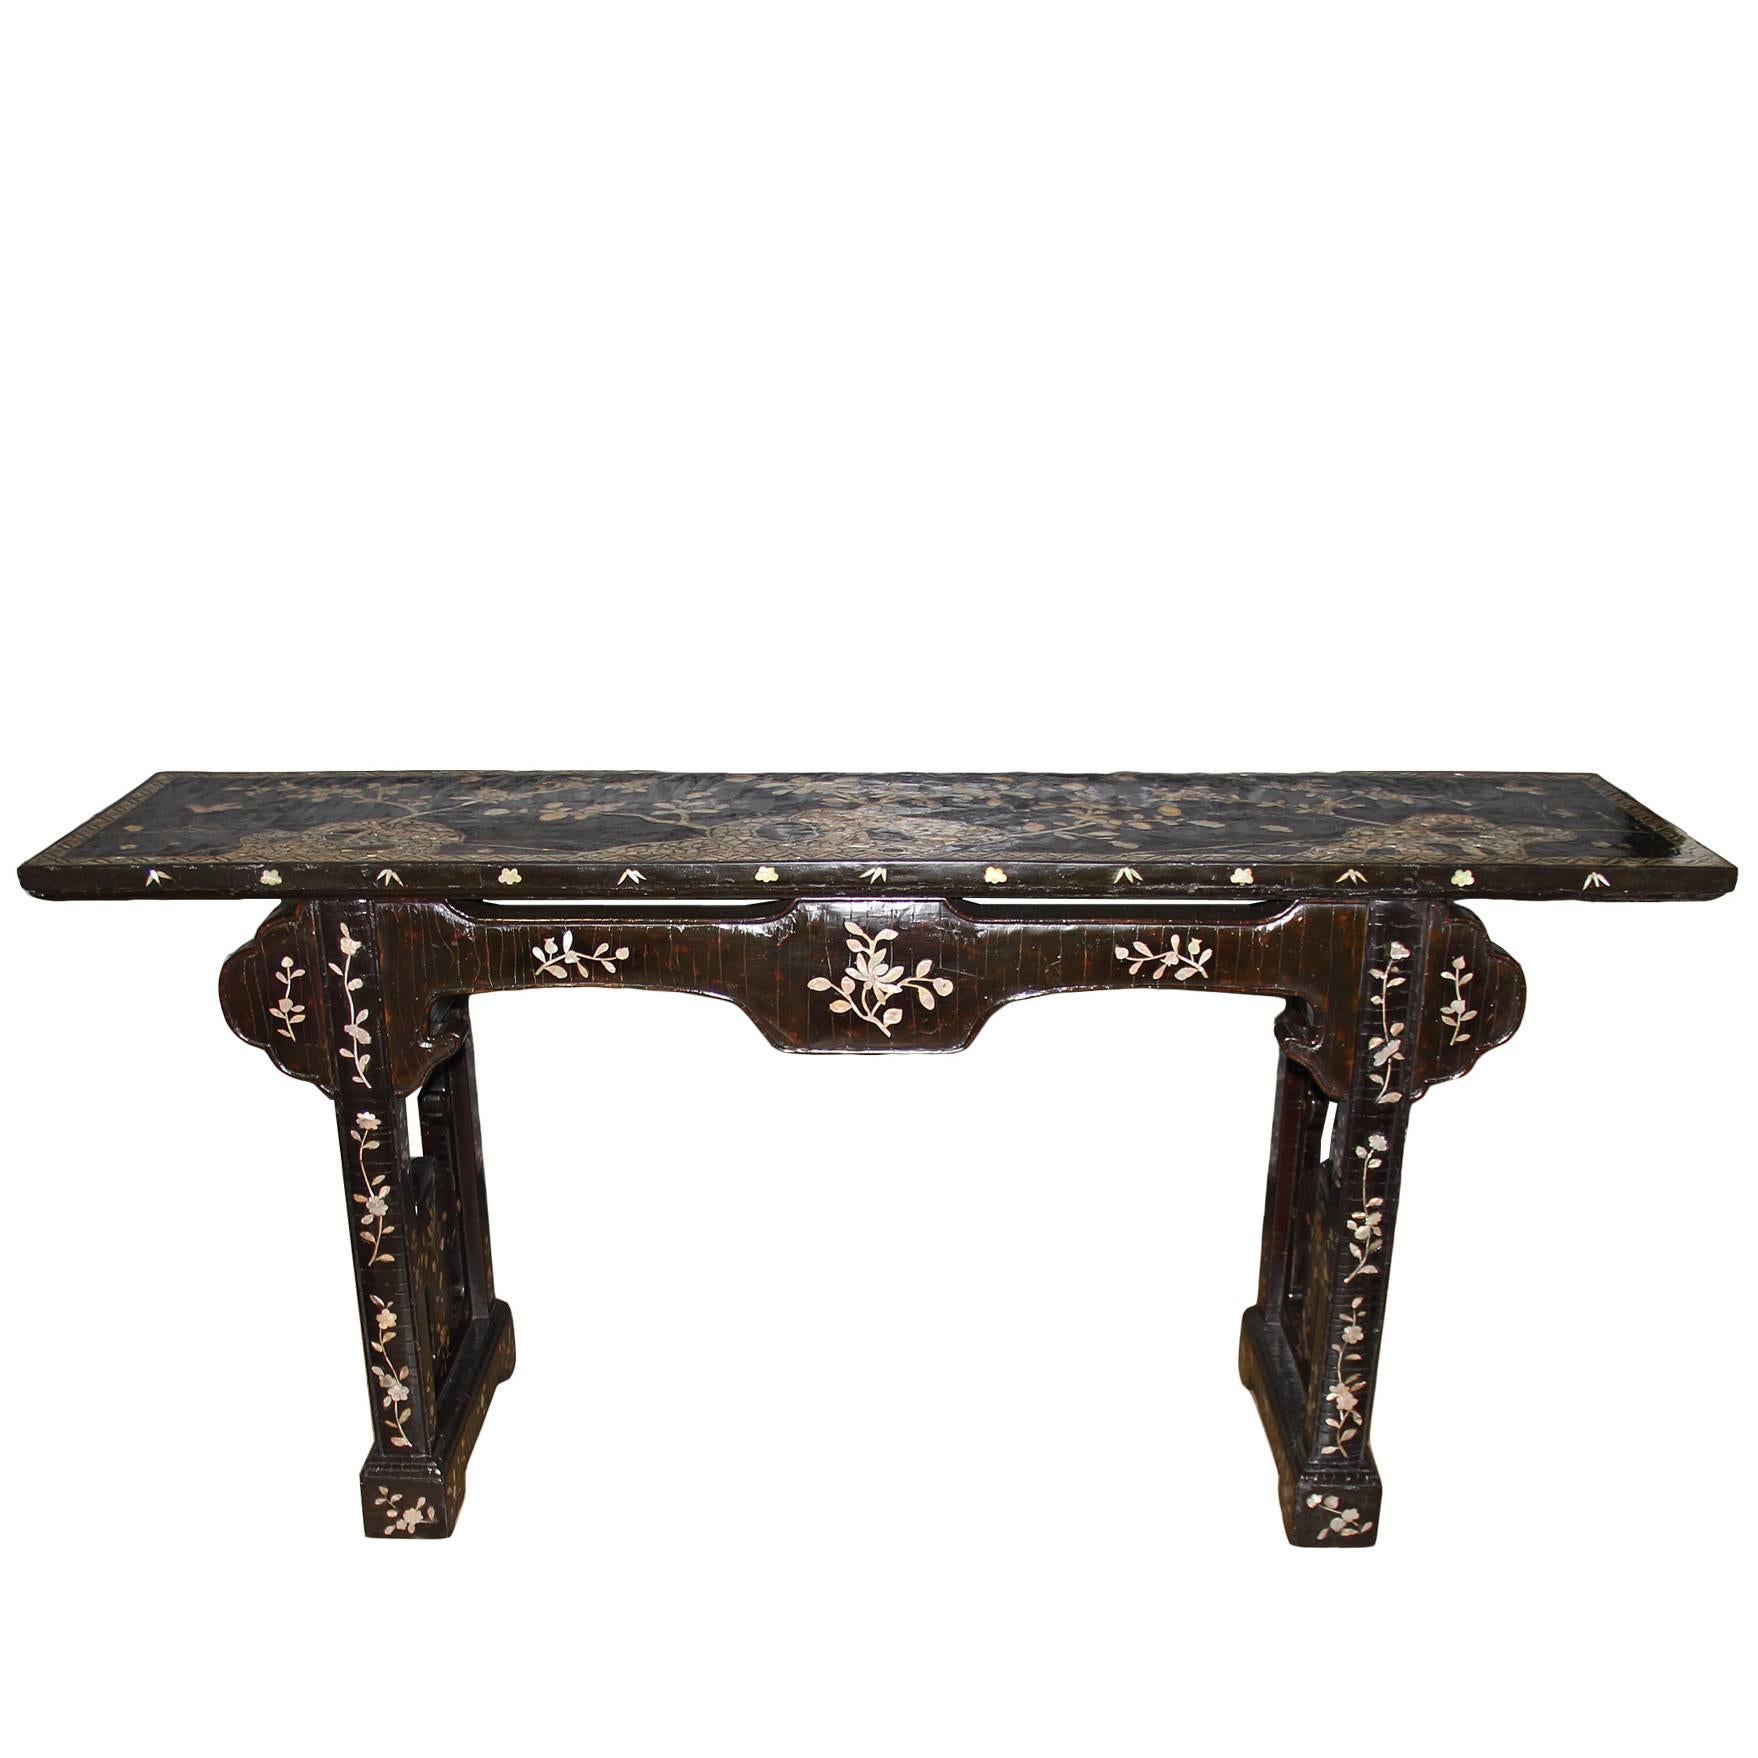 Late 17th Century Qing Dynasty Black Lacquer and Abalone Inlaid Altar Table For Sale